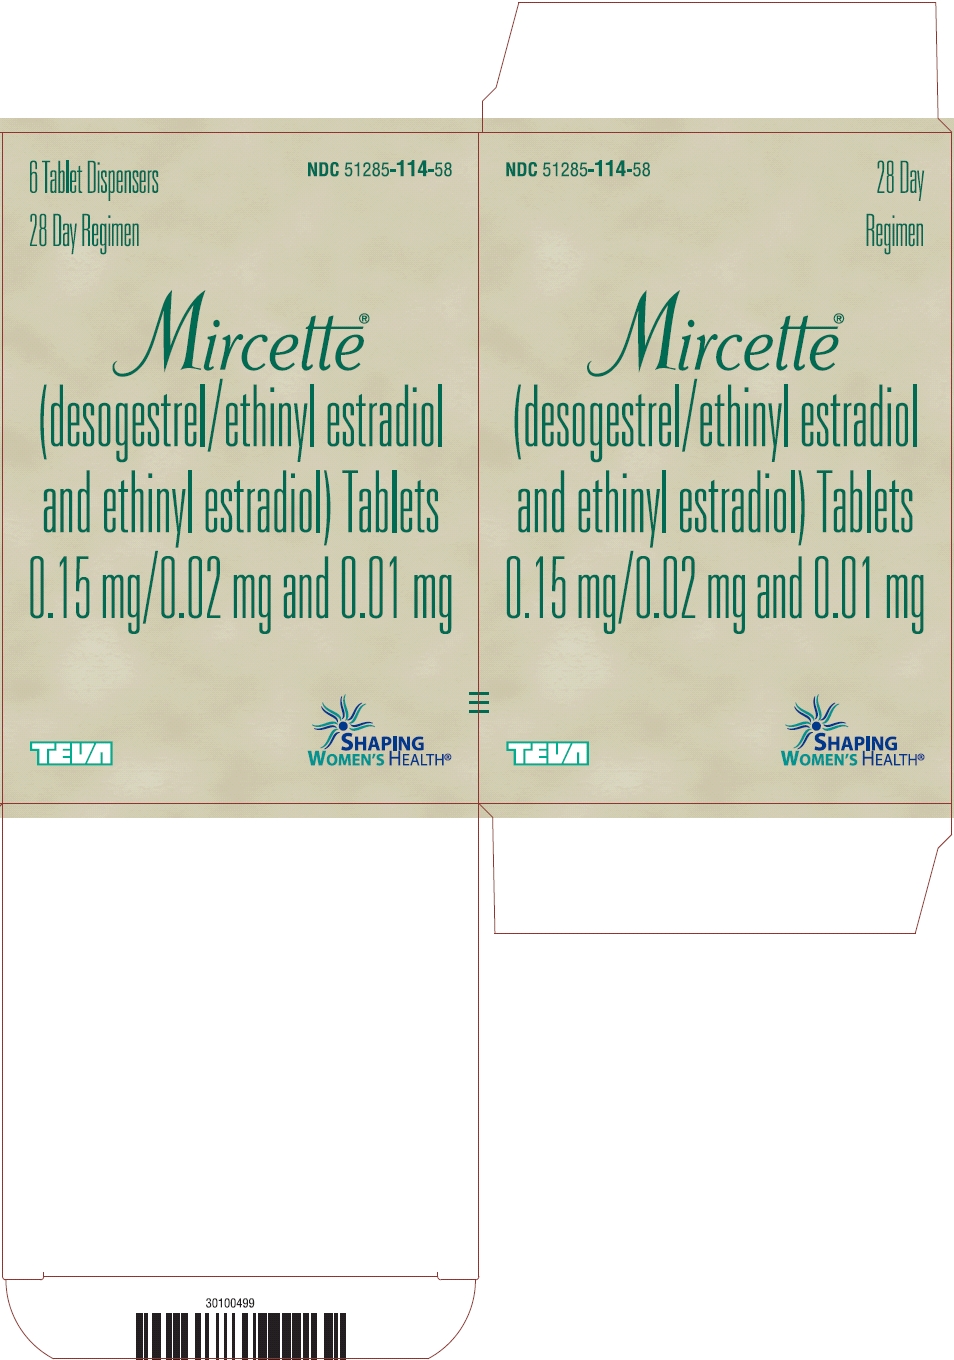 Mircette® Tablets 0.15 mg/0.02 mg and 0.01 mg, 6 Dispenser Carton, Part 2 of 2